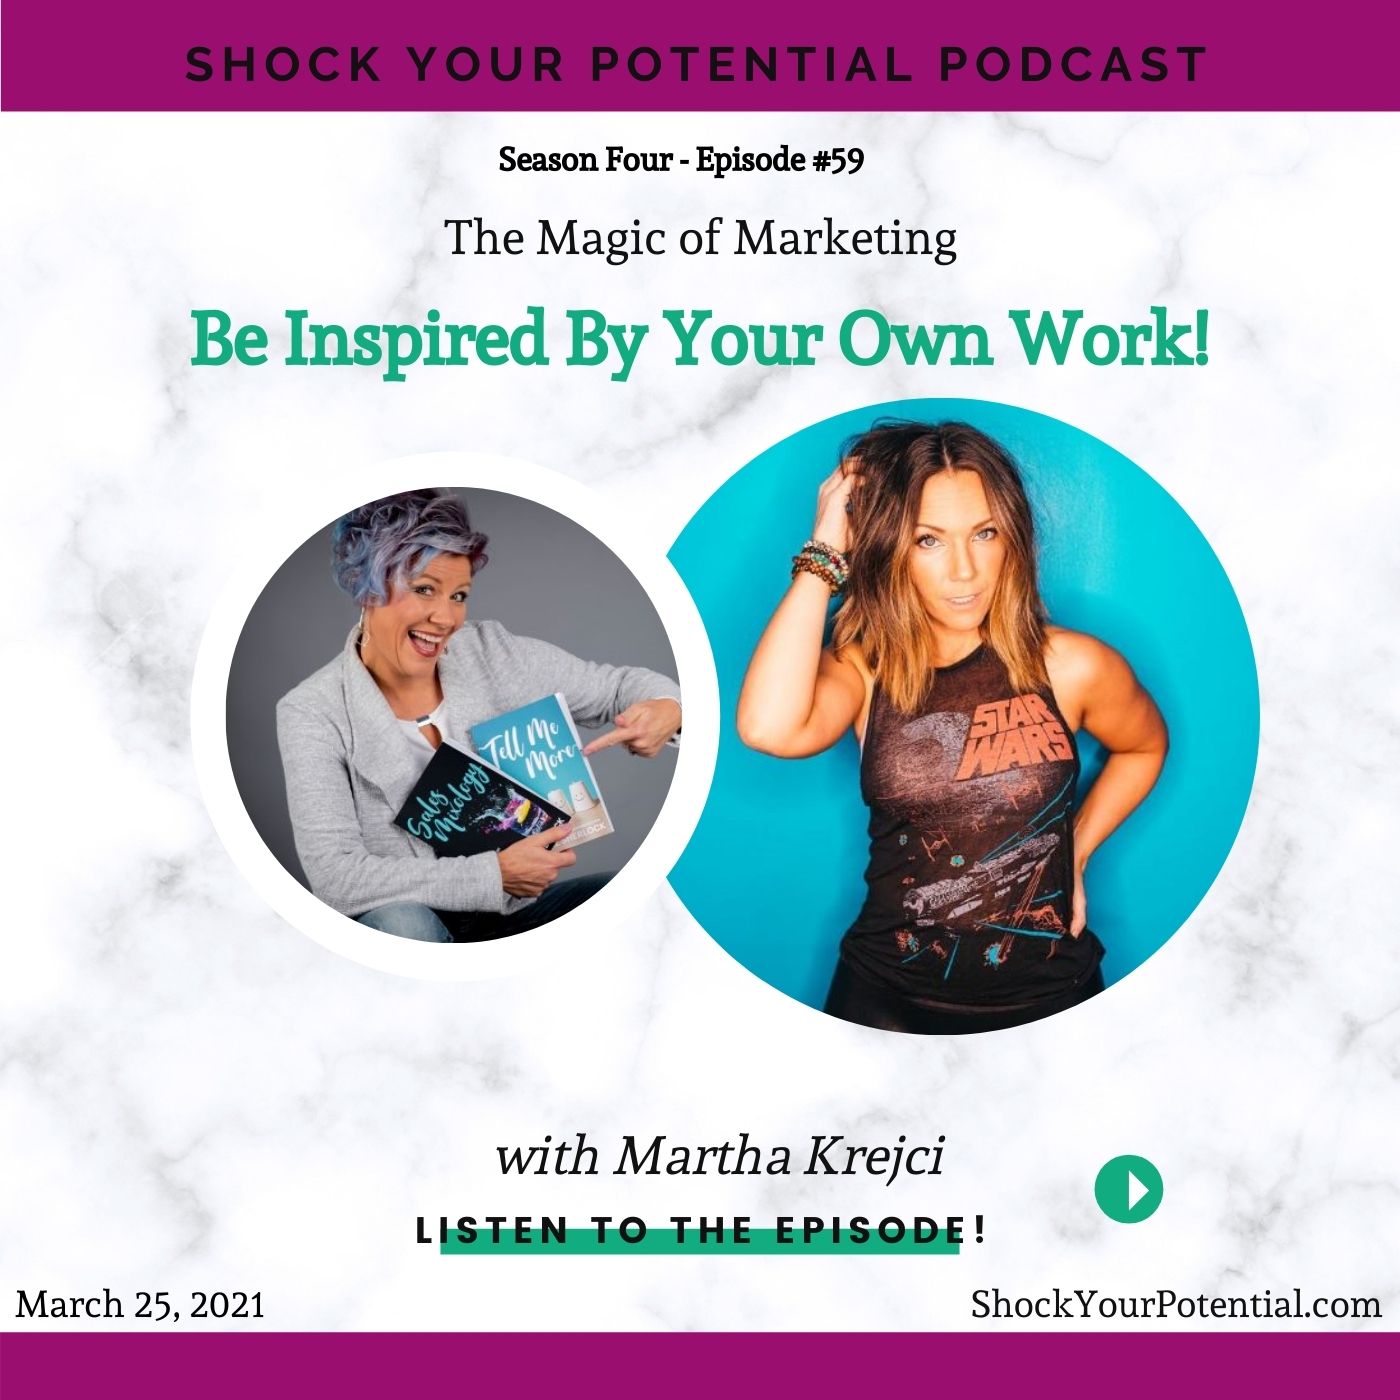 Be Inspired By Your Own Work! – Martha Krejci